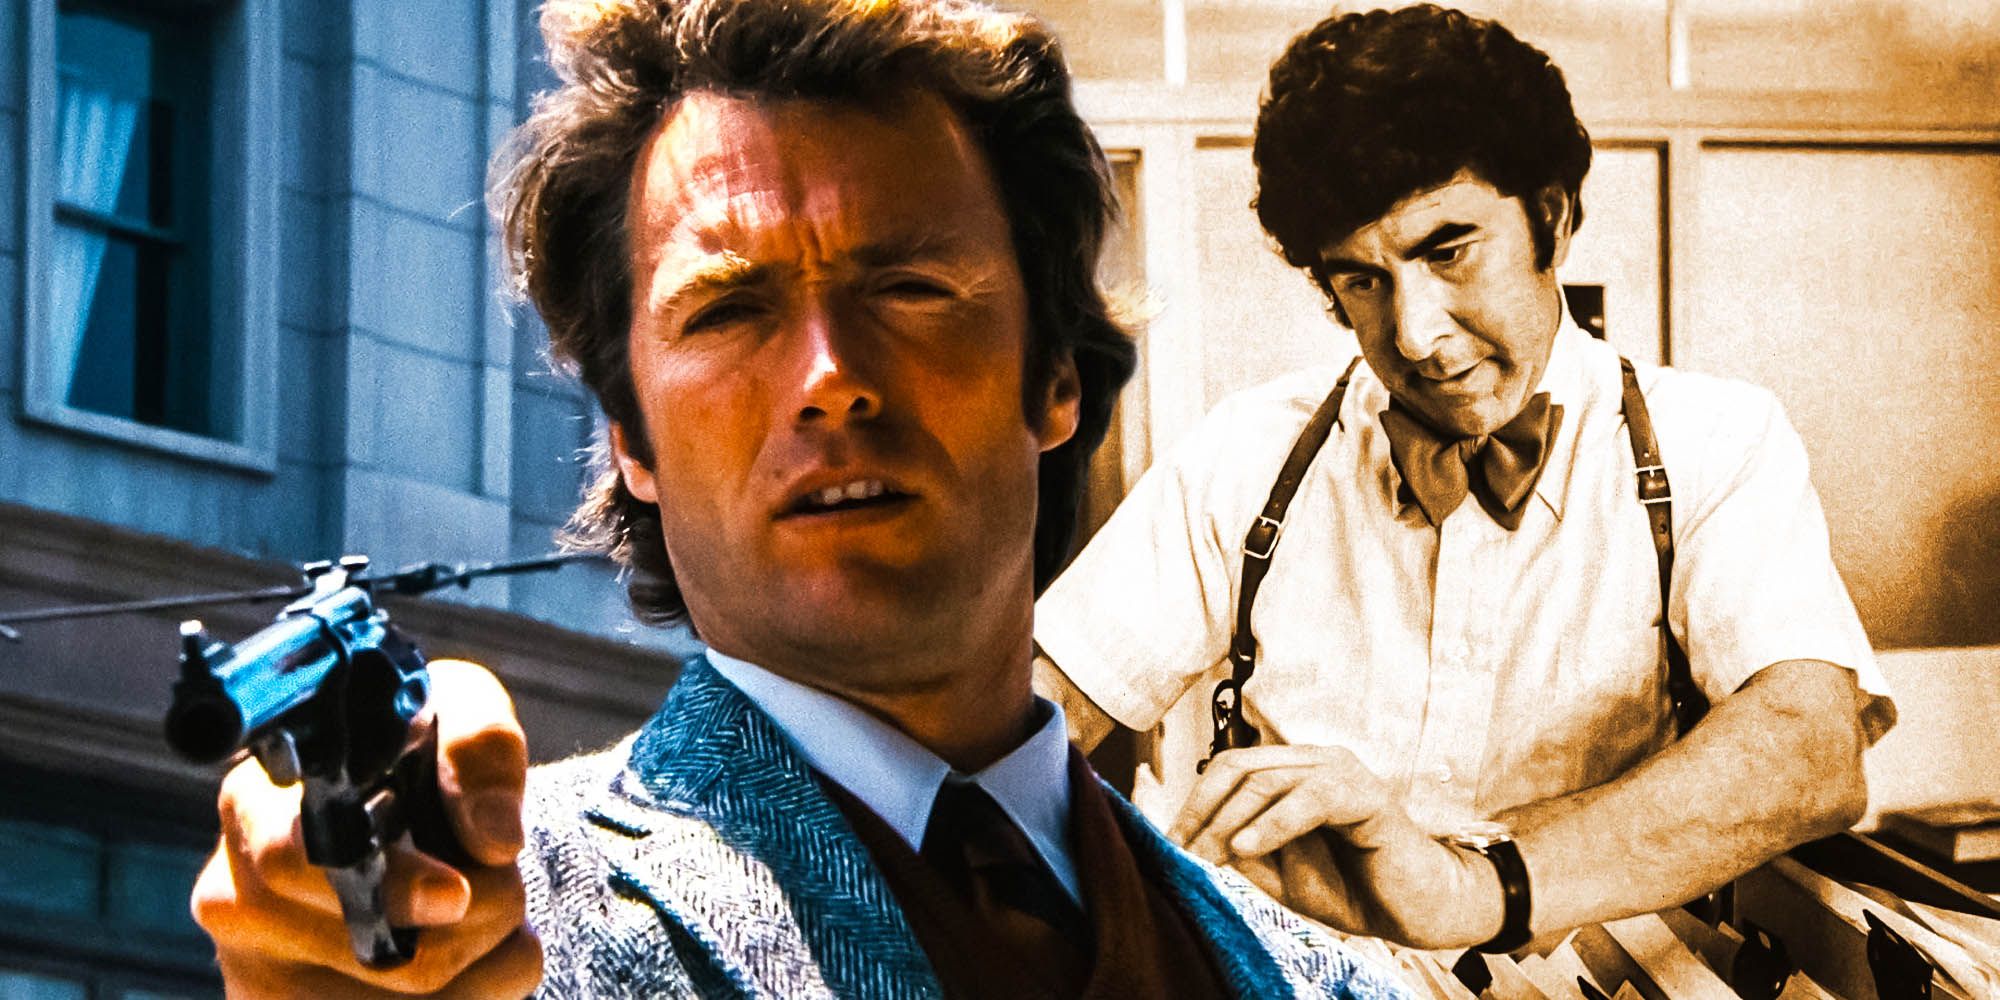 https://static1.srcdn.com/wordpress/wp-content/uploads/2021/10/Clint-eastwood-Dirty-harry-real-life-zodia-case-dave-Toschi.jpg